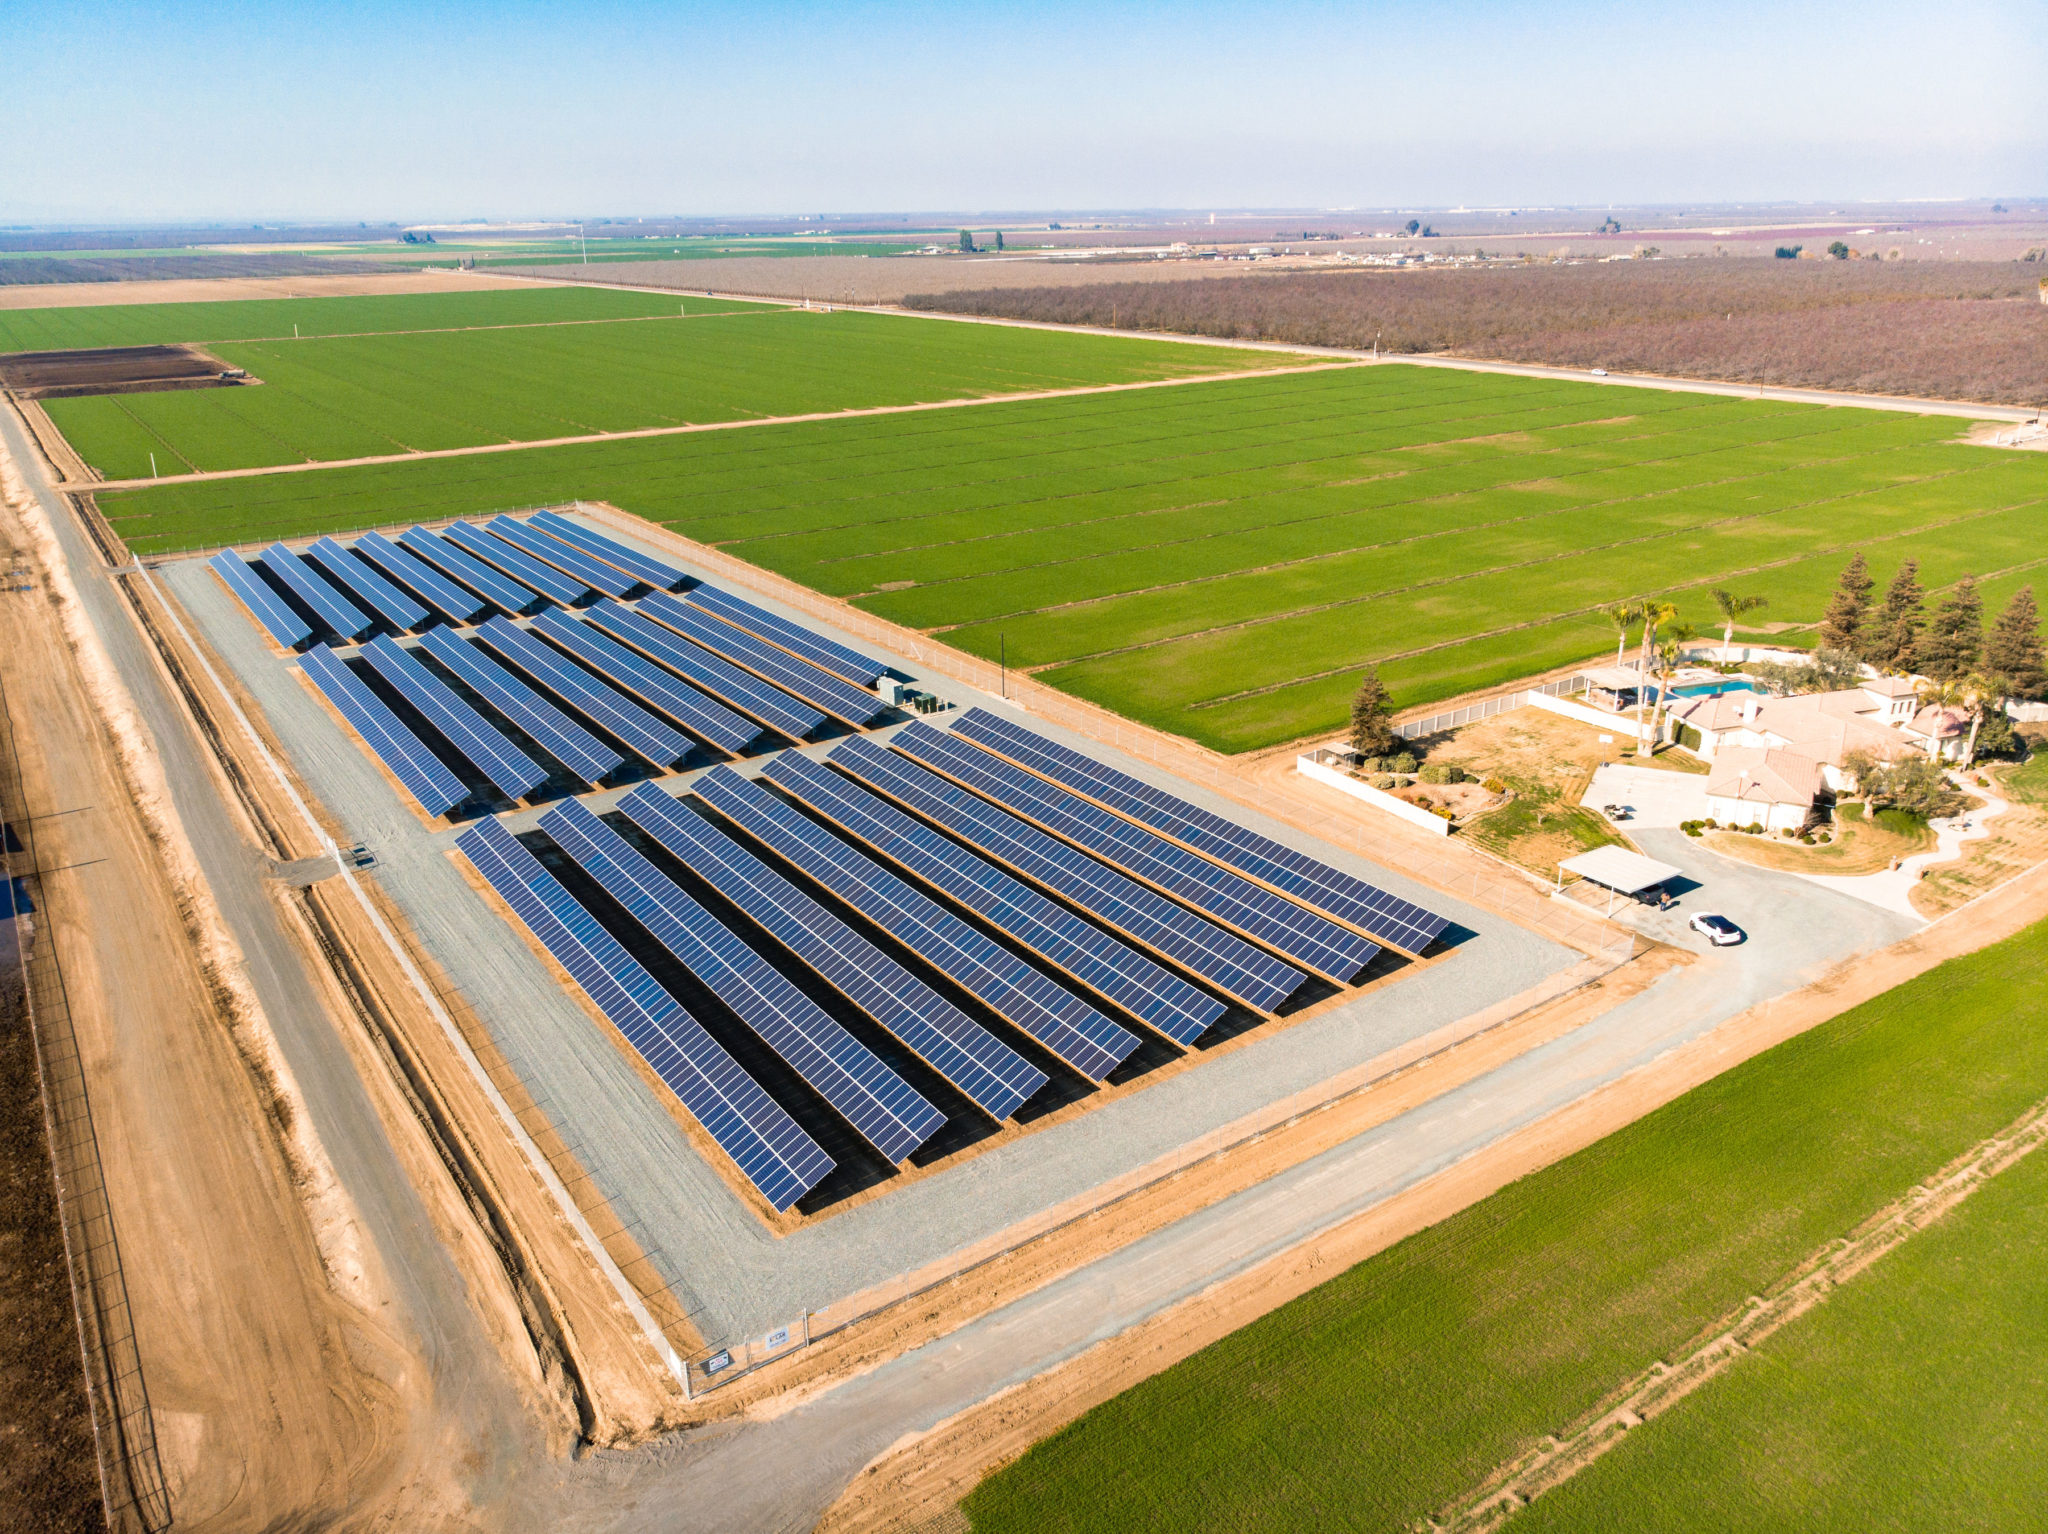 Aerial view of small solar farm constructed at a dairy farm on California agricultural land.